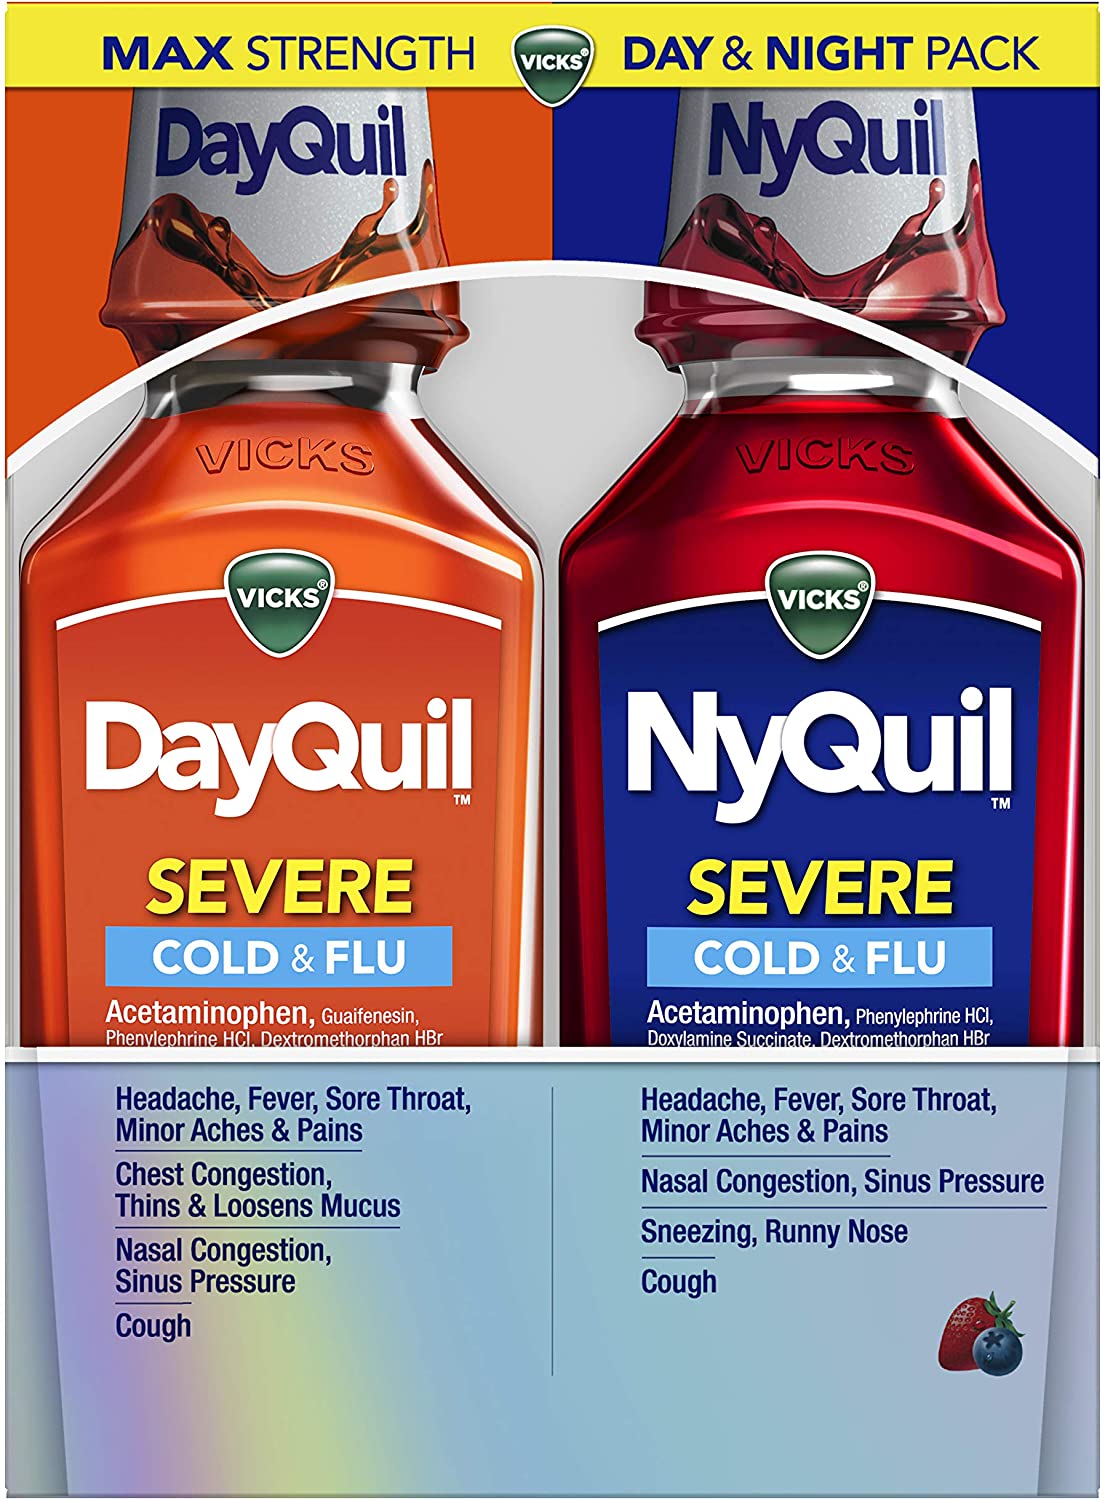 Vicks DayQuil and NyQuil SEVERE, Liquid Cough - 12 FL OZ Day and Night Pack - Amazon Fresh - $7.51 After Coupon